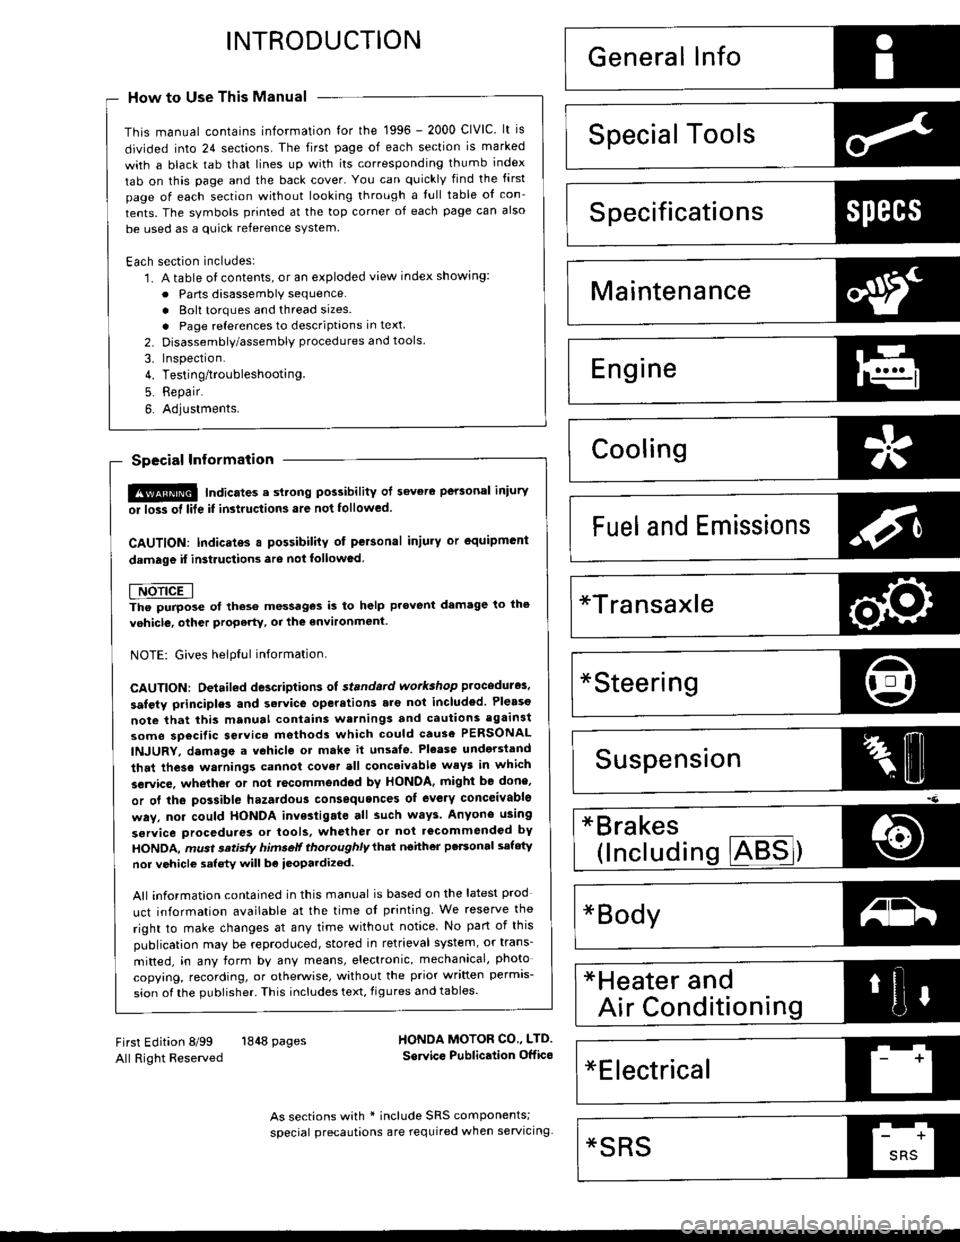 HONDA CIVIC 1996 6.G Workshop Manual INTRODUCTION
How to Use This Manual
This manual contains information for the 1996 - 2000 ClVlC. lt is
divided into 24 sections. The first page of each section is marked
with a black tab that lines up 